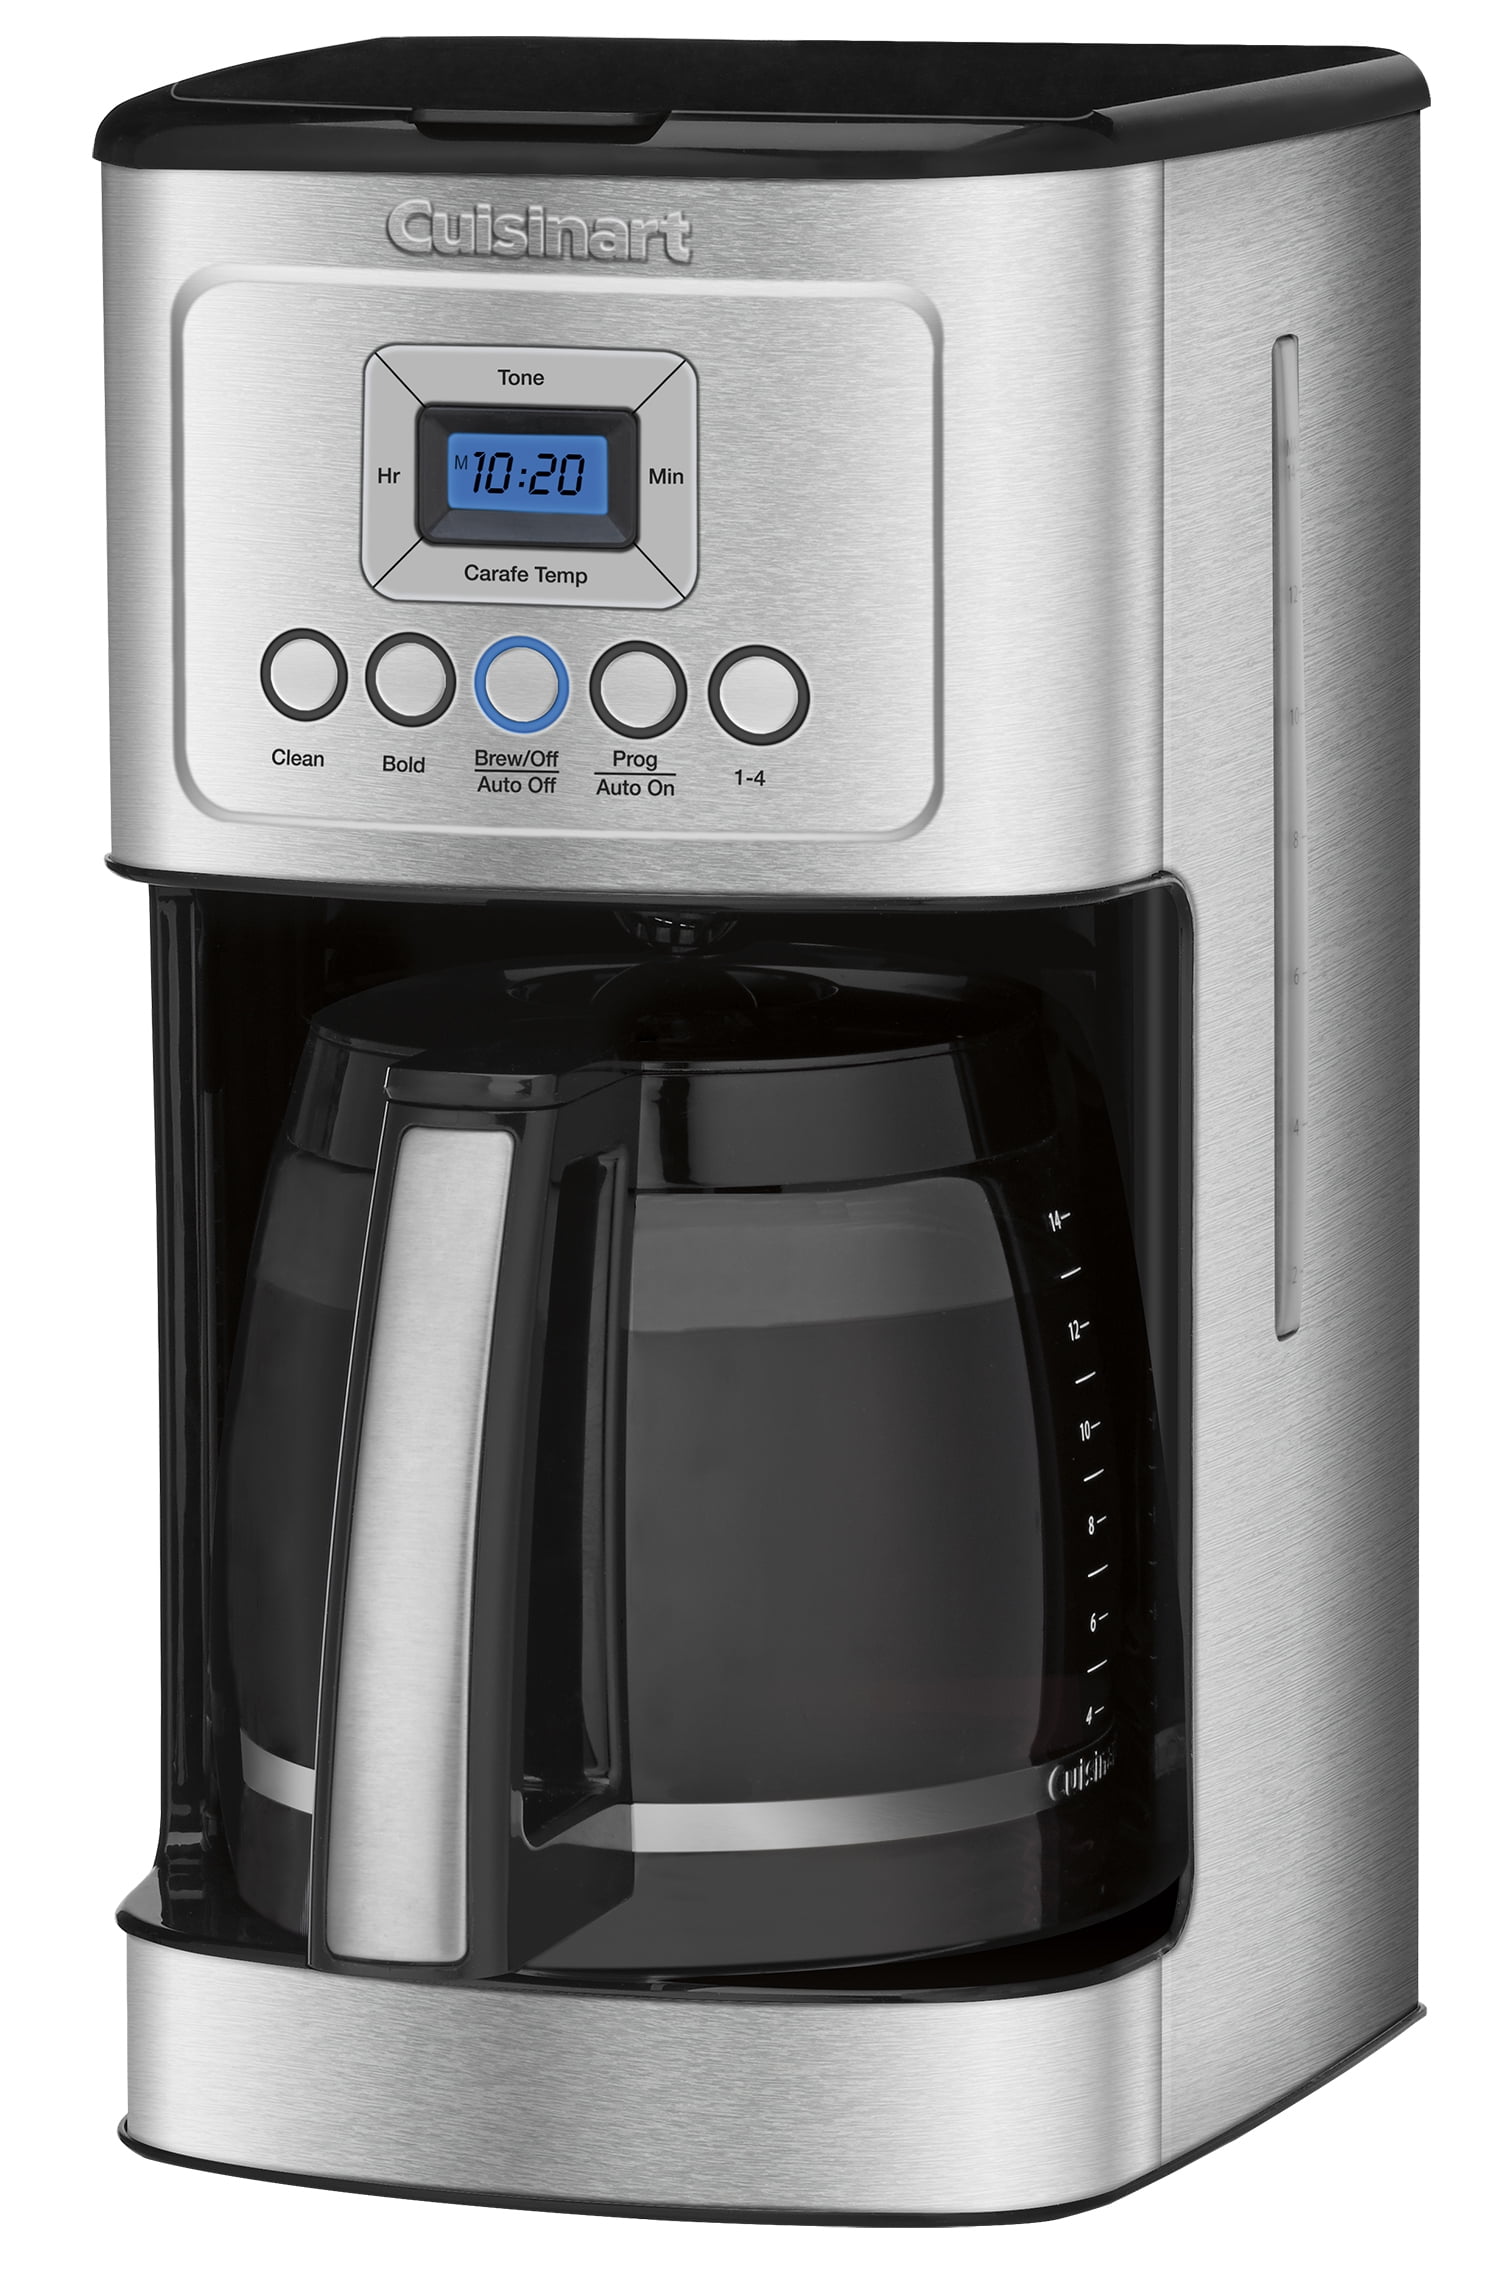 14-16 cup coffee makers